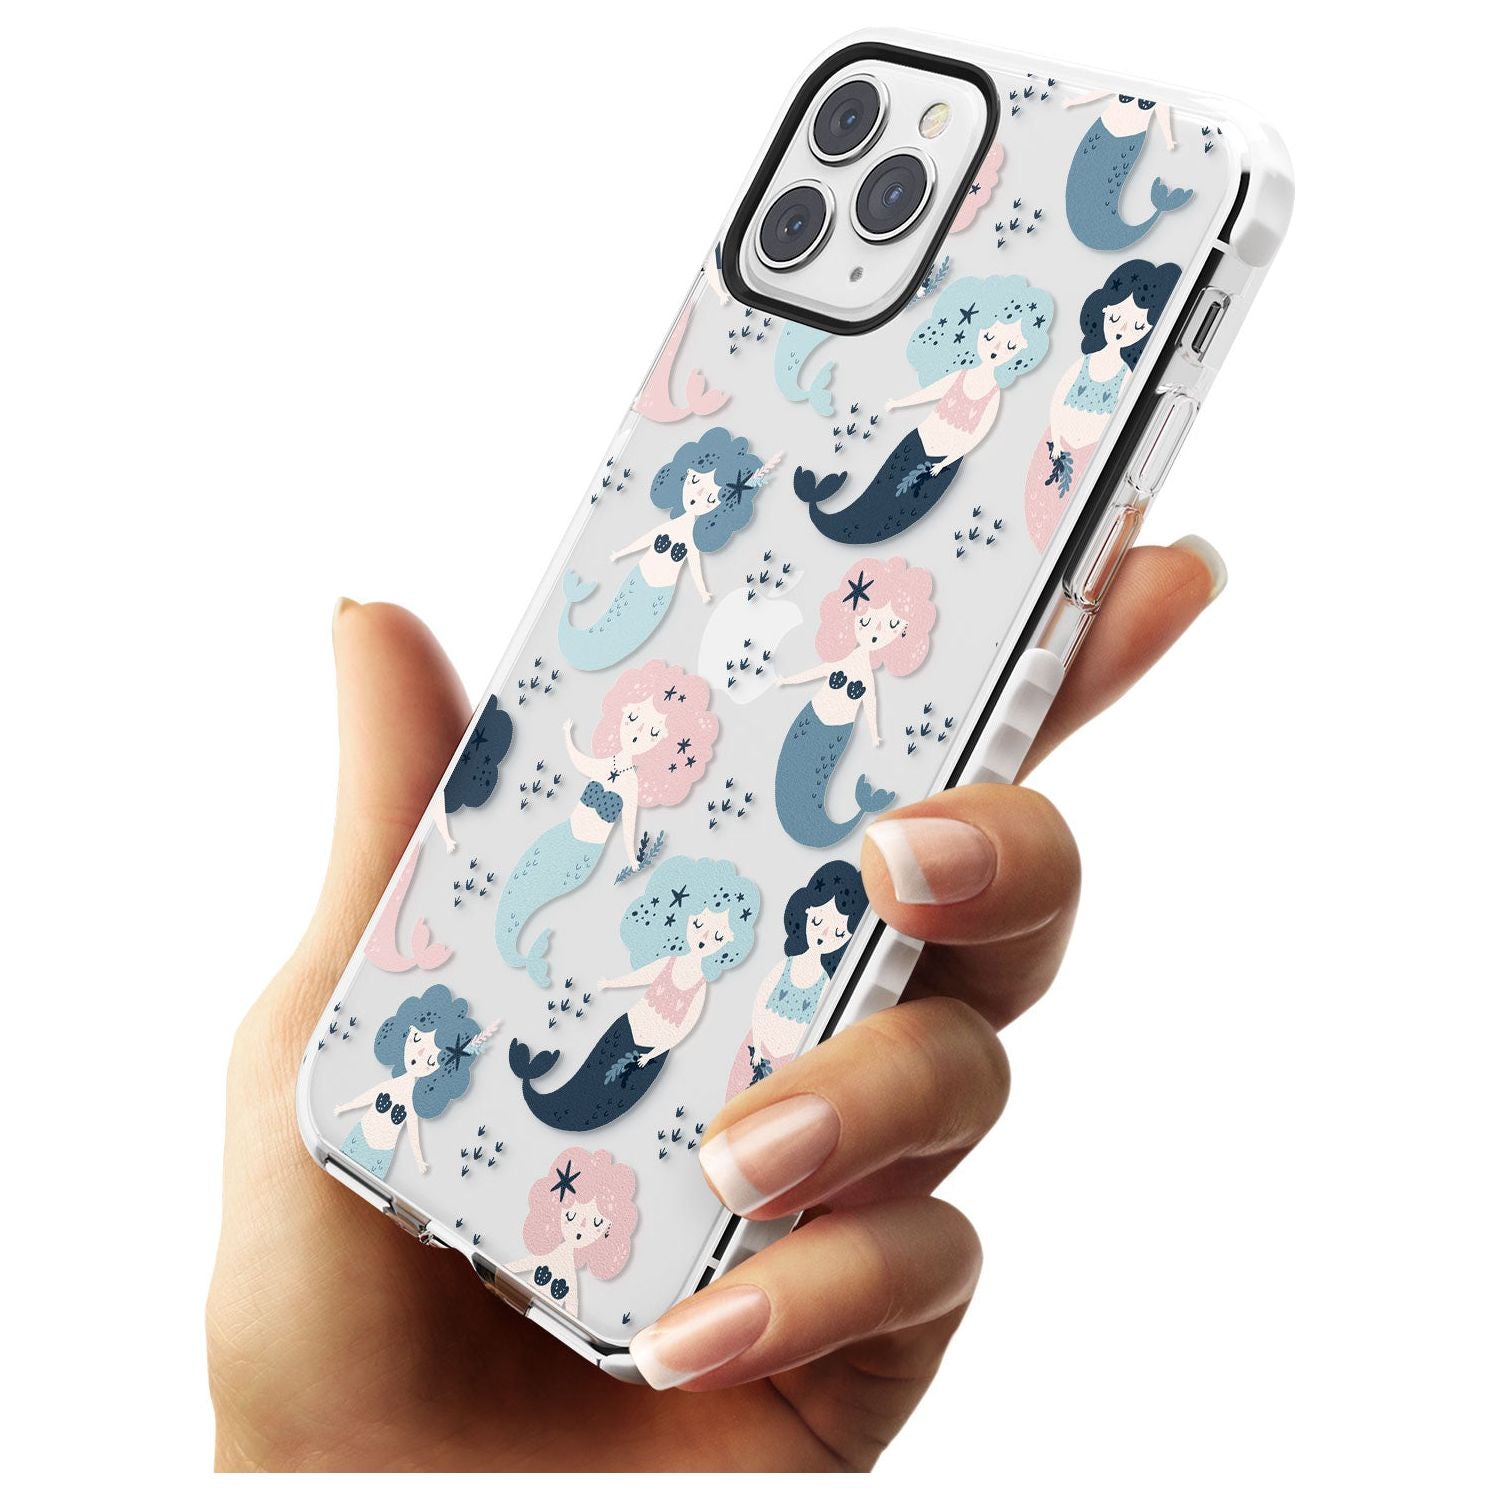 Mermaid Vibes Impact Phone Case for iPhone 11 Pro Max